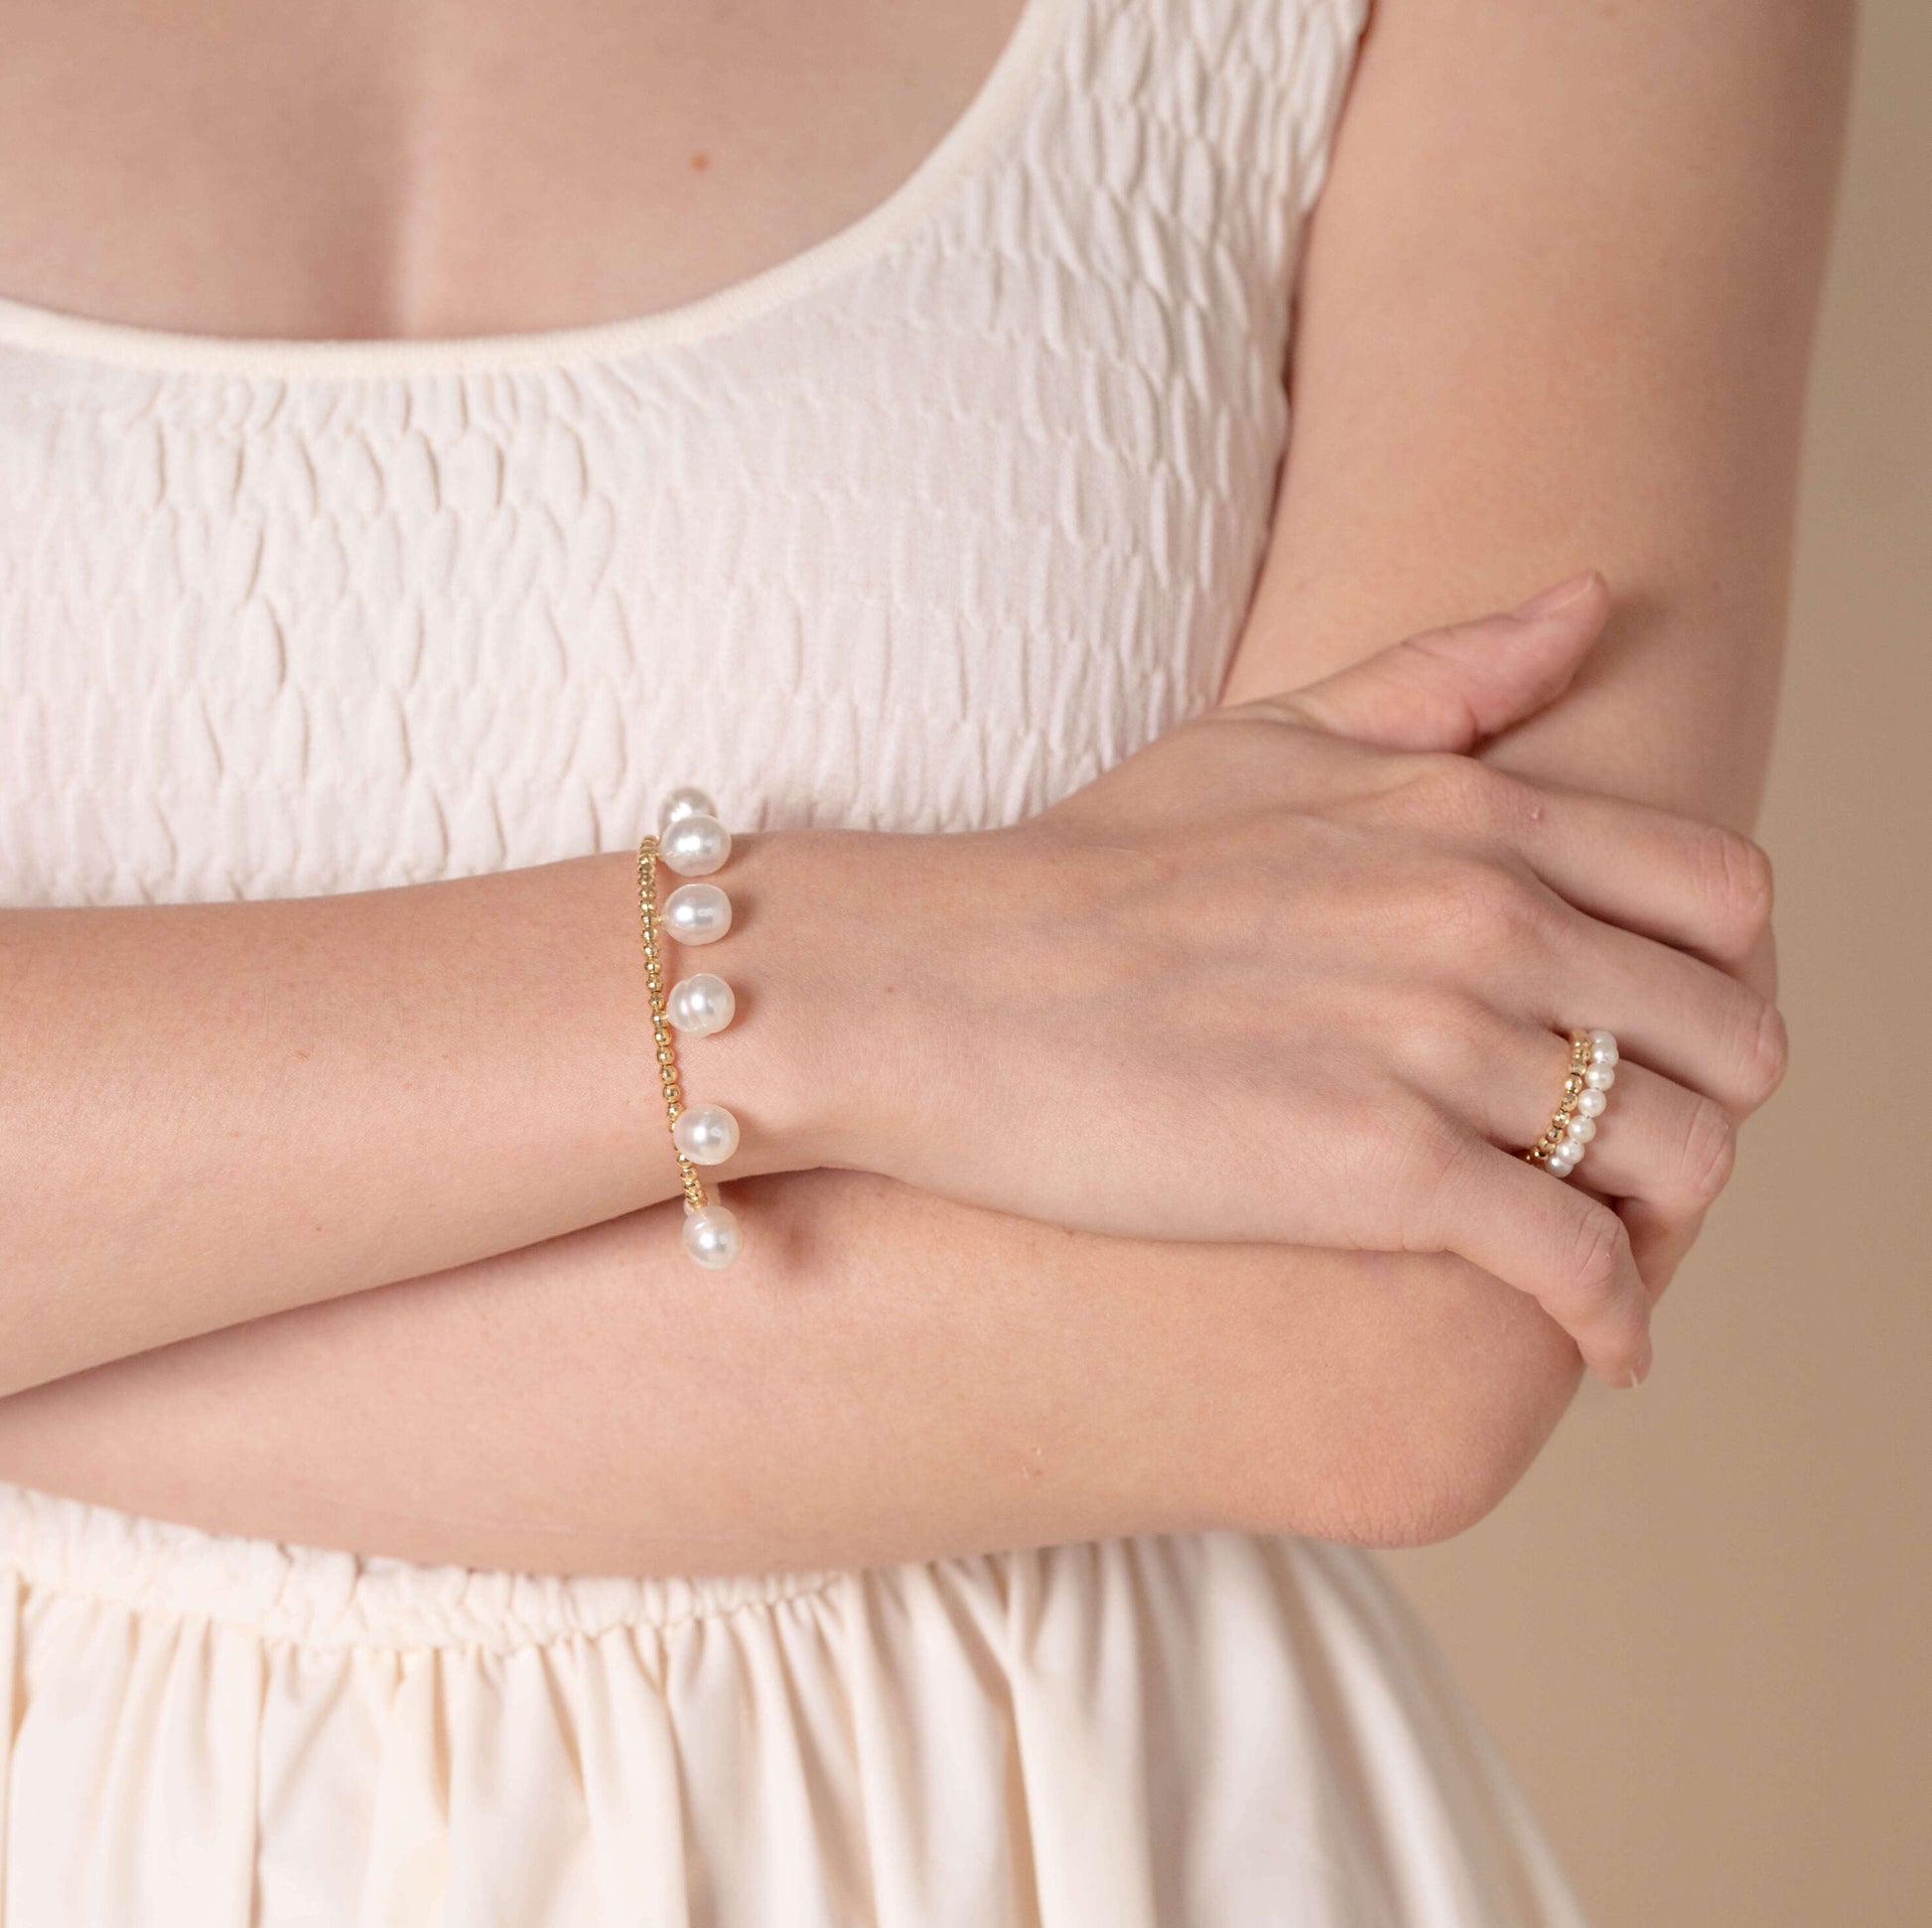 Stylish lady in white dress accessorized with Pearl Dot x Gold Bracelet.